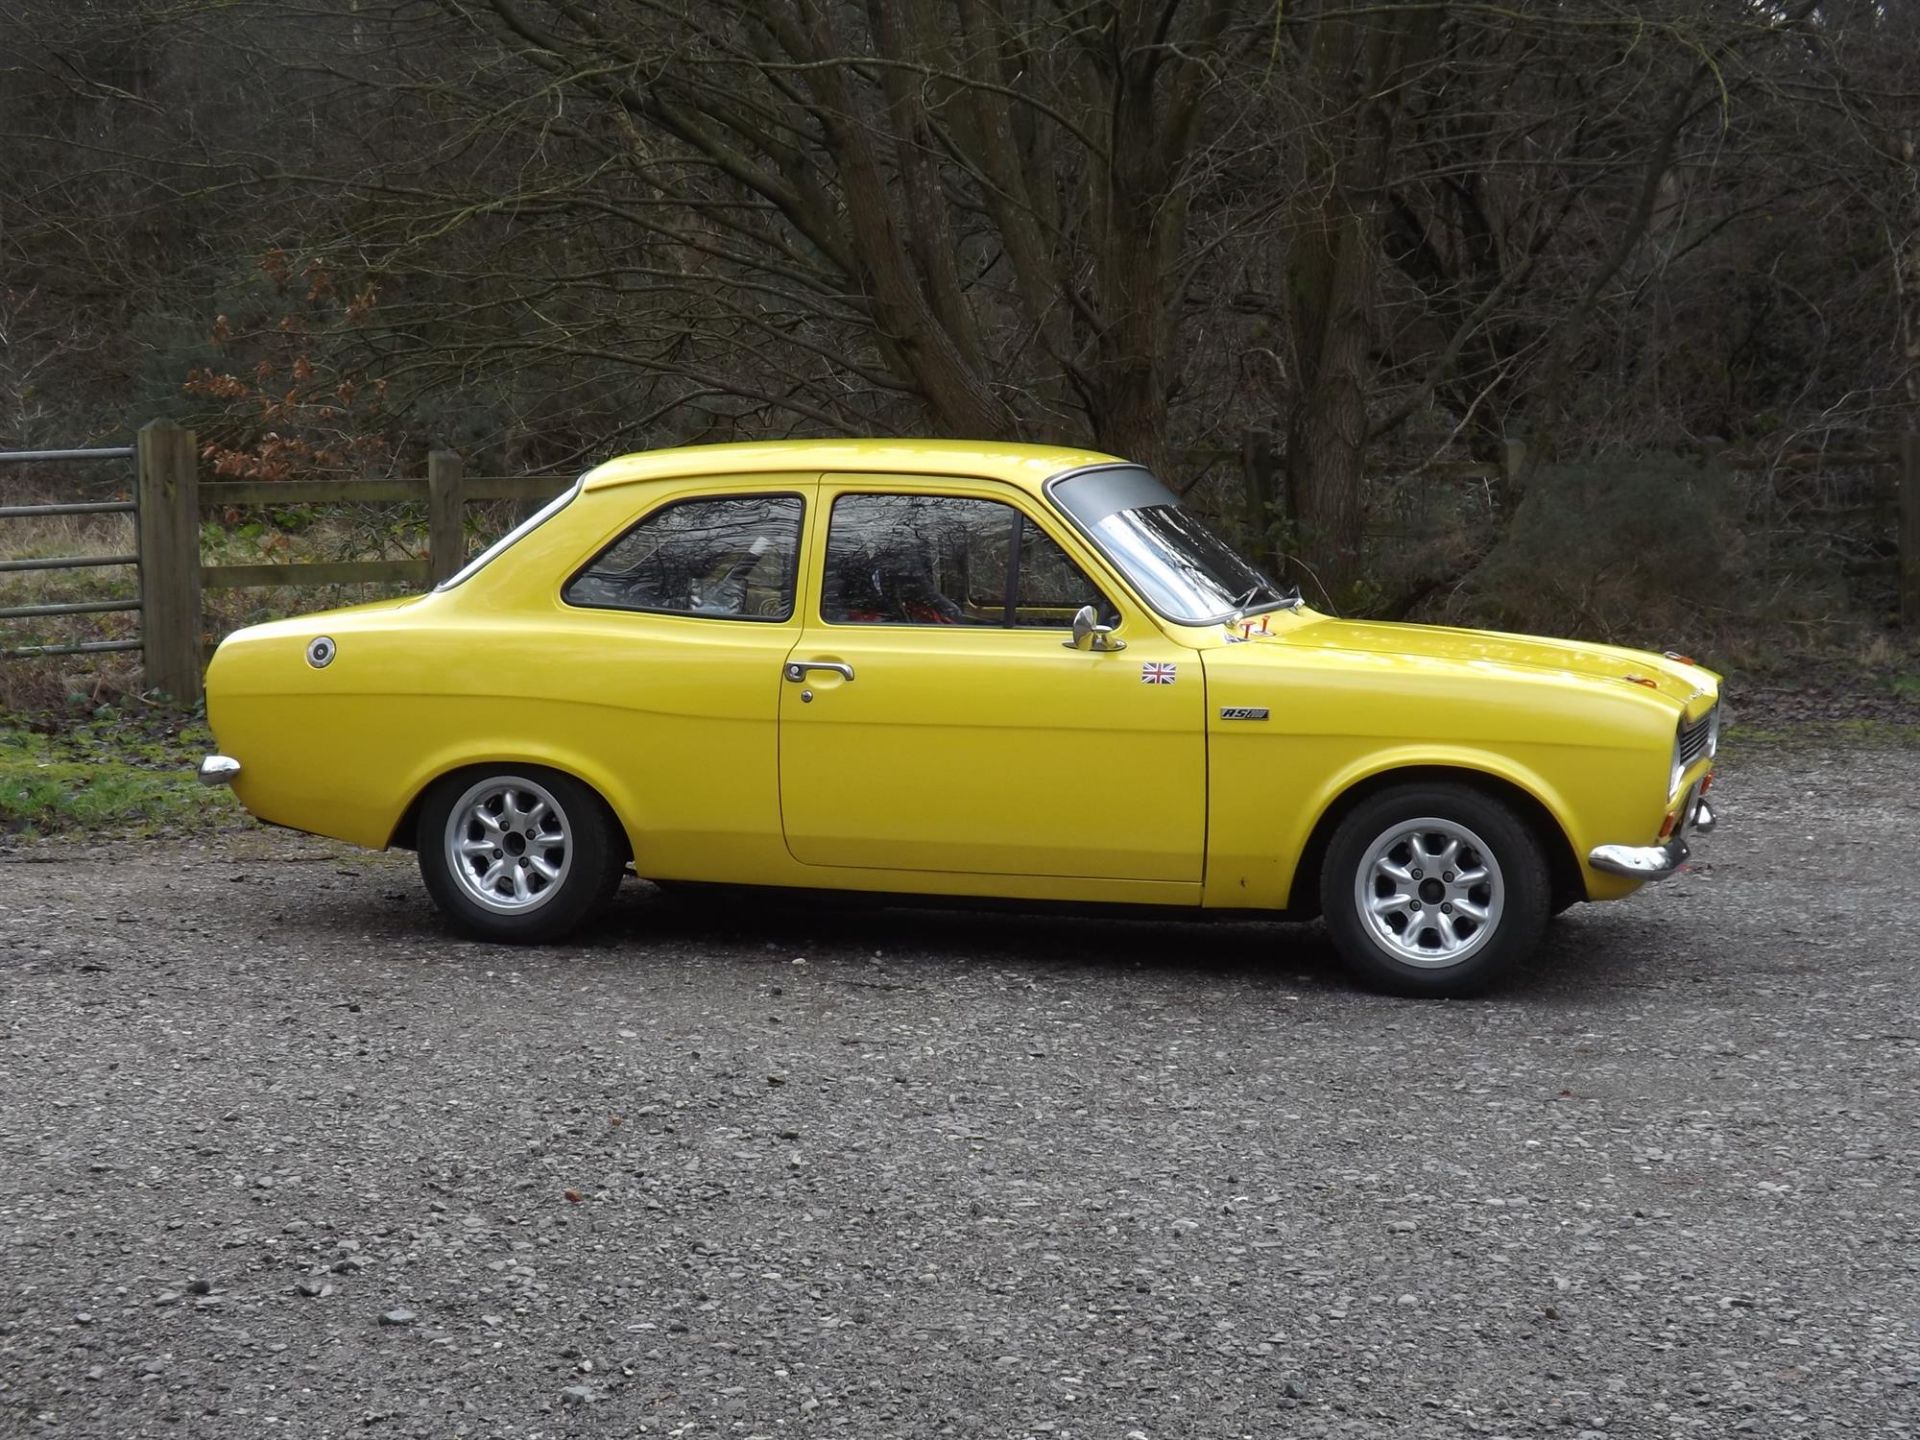 1972 Ford Escort Mk1 RS2000 Homage - Image 9 of 10